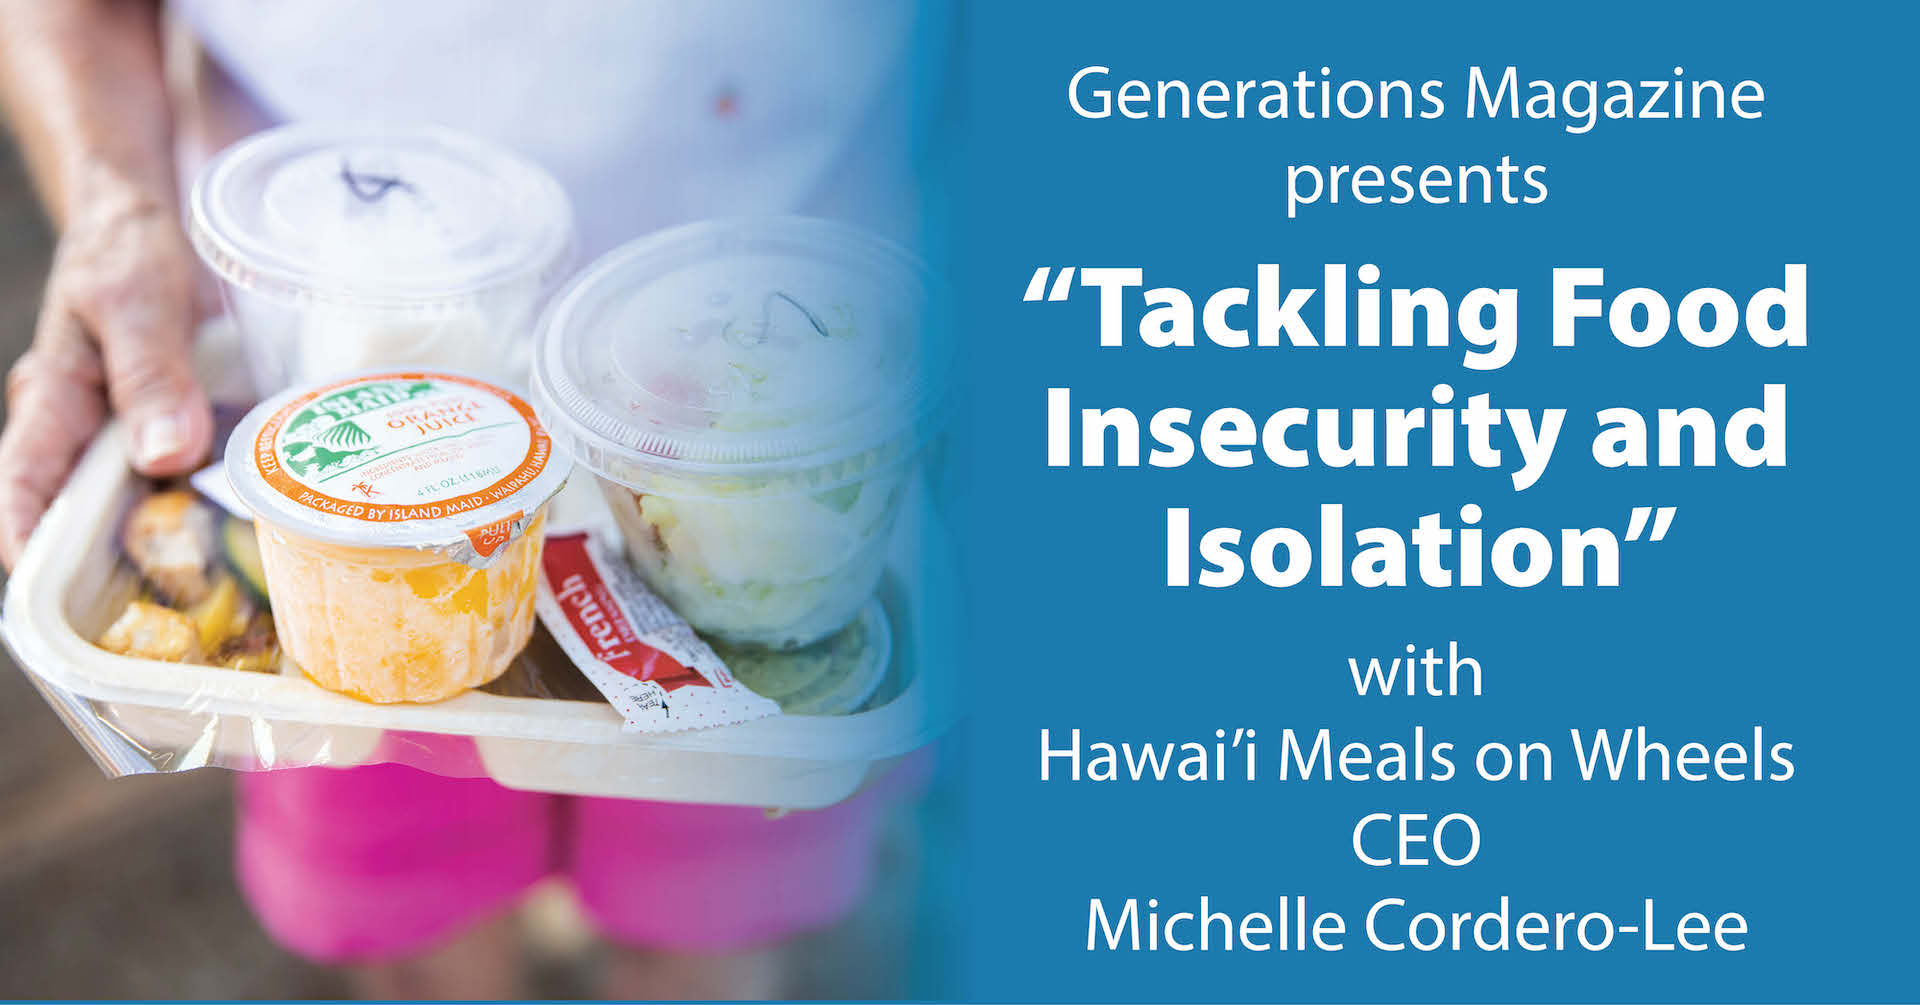 Tackling Food Insecurity and Isolation